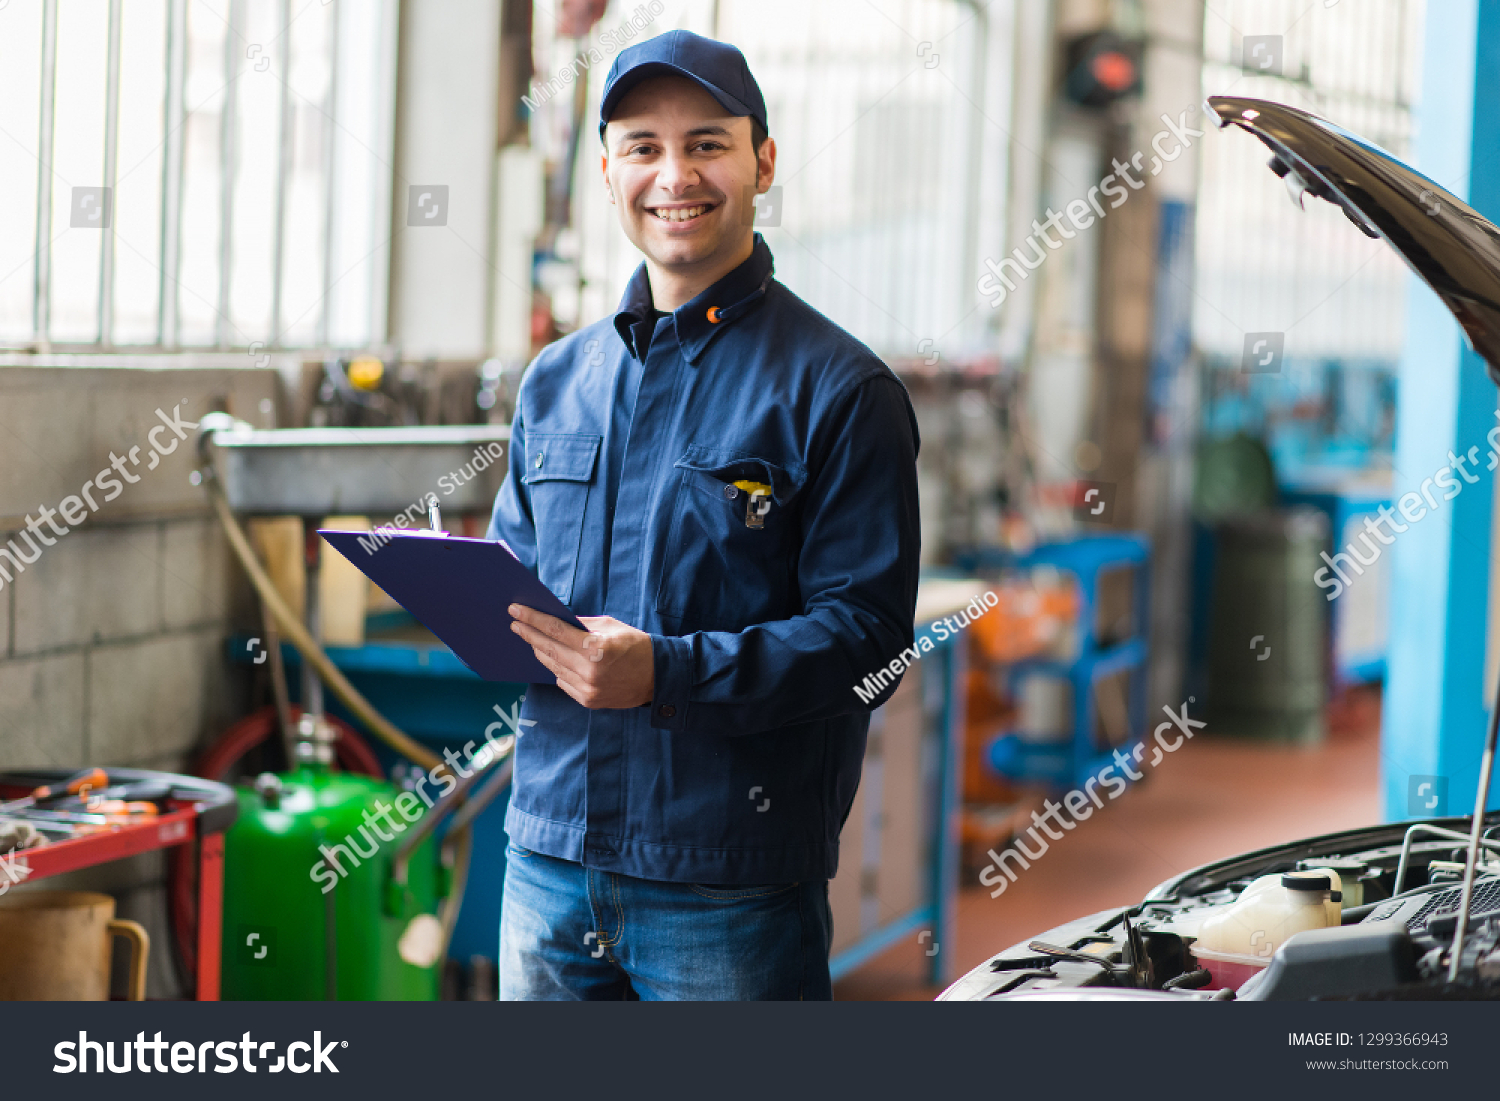 Portrait of a mechanic at work in his garage #1299366943